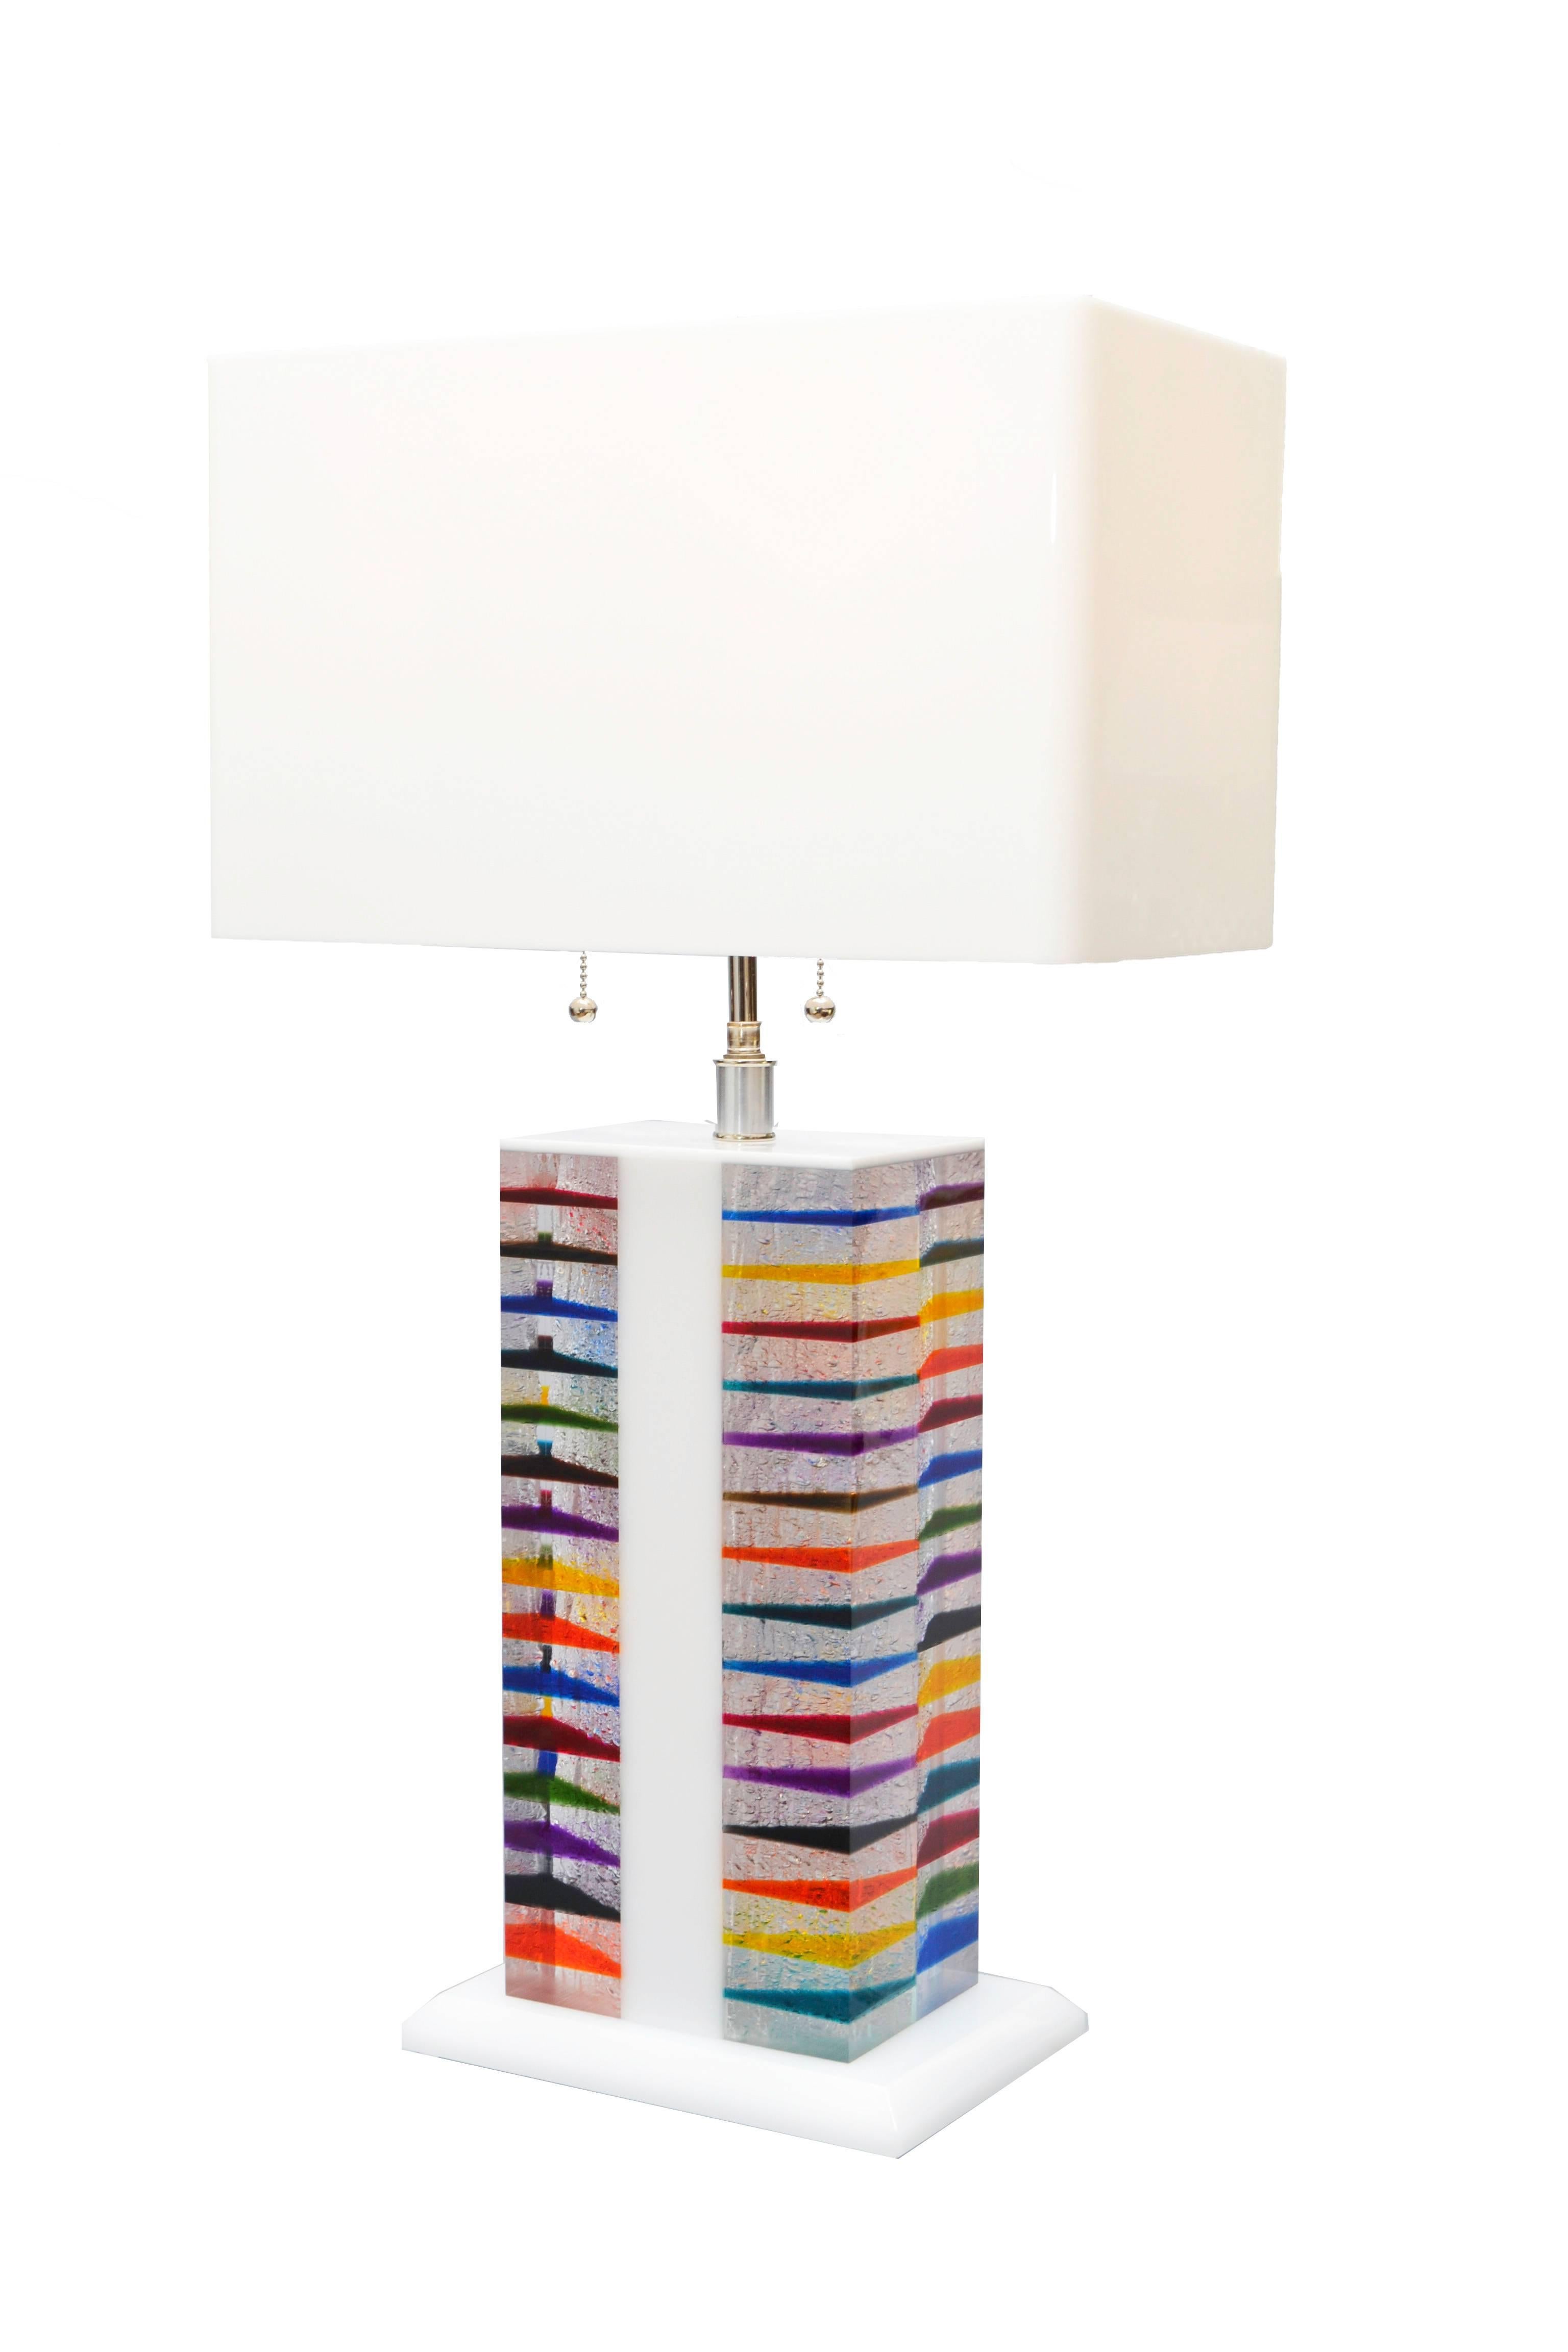 Pop Art Architectural shaped table lamp in bright Rainbow colors. Comes with a unique matching rectangular shade in white Acrylic.
The Nickel lamp holder can support two light bulbs of max 60 W each and is of the highest quality.
This lamp is our